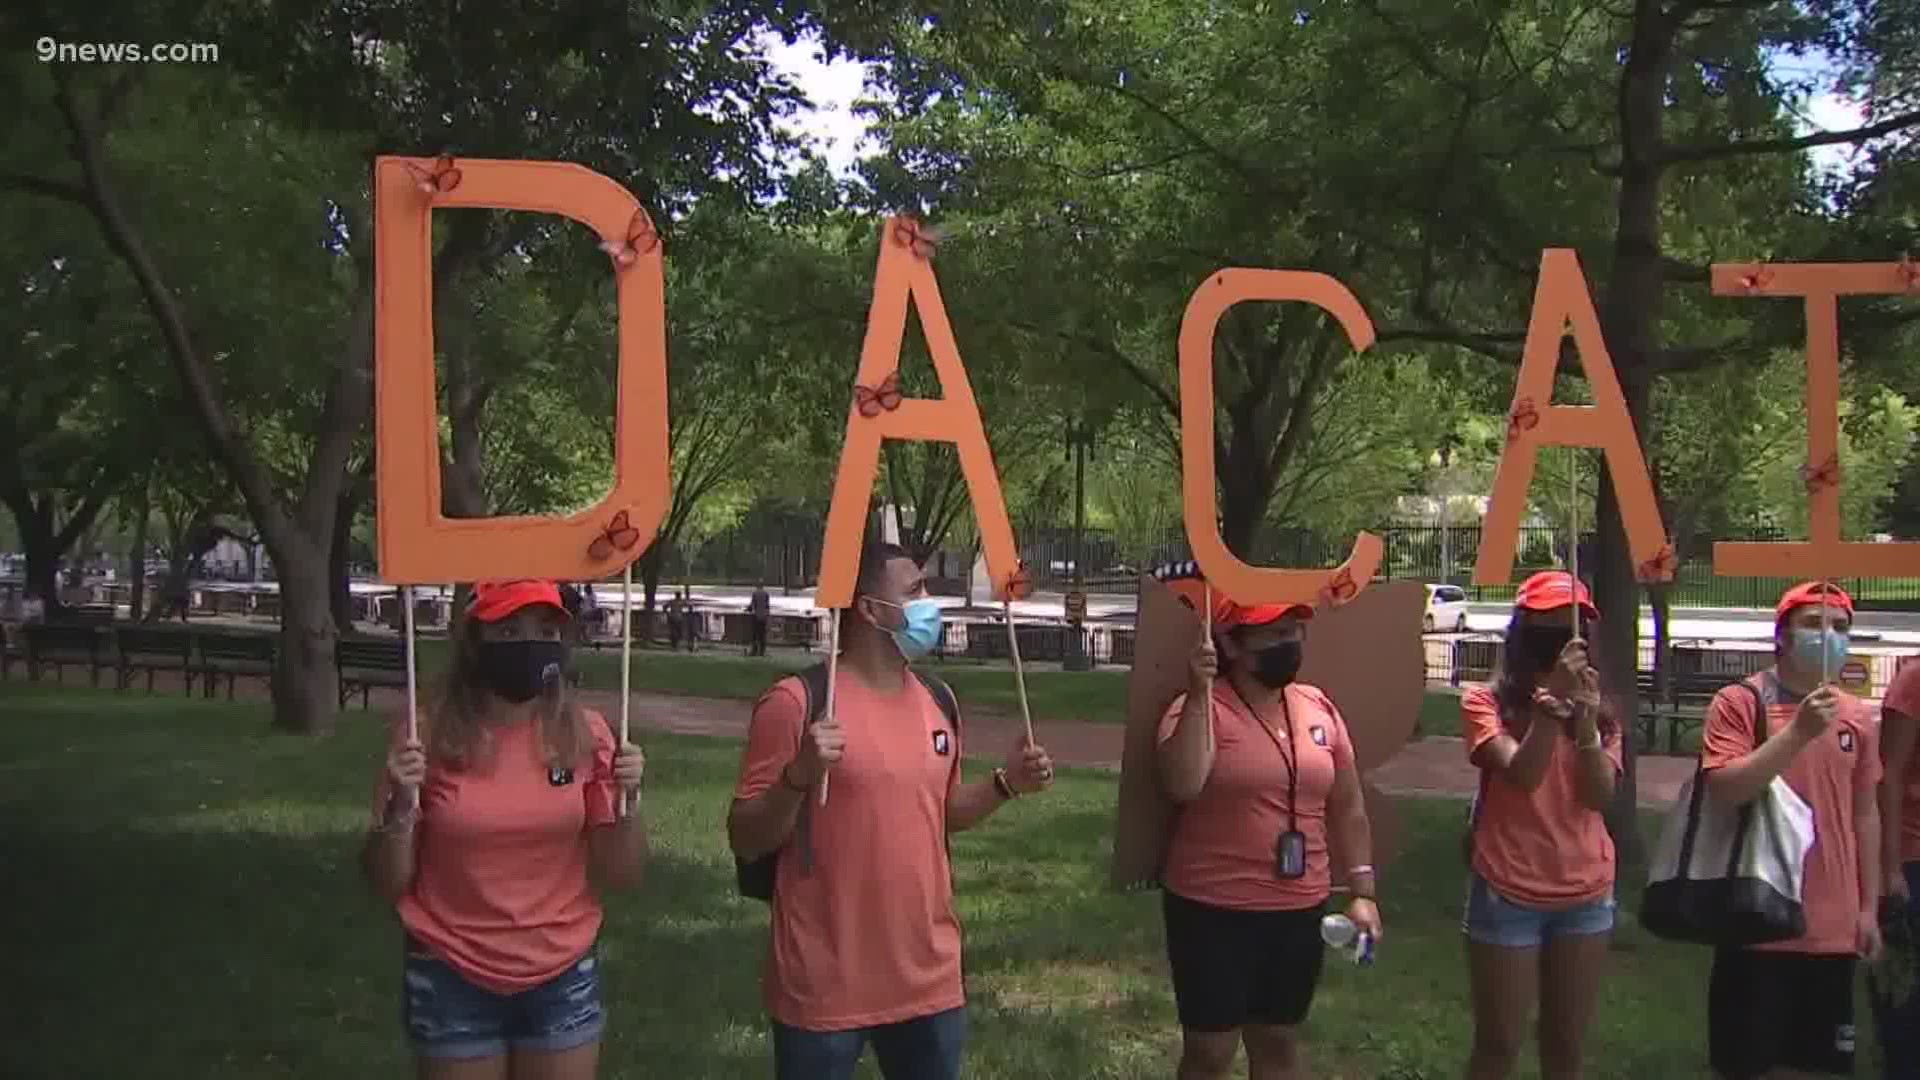 A federal judge in Texas ruled the Deferred Action for Childhood Arrivals program unlawful, forcing a halt on new application approval.